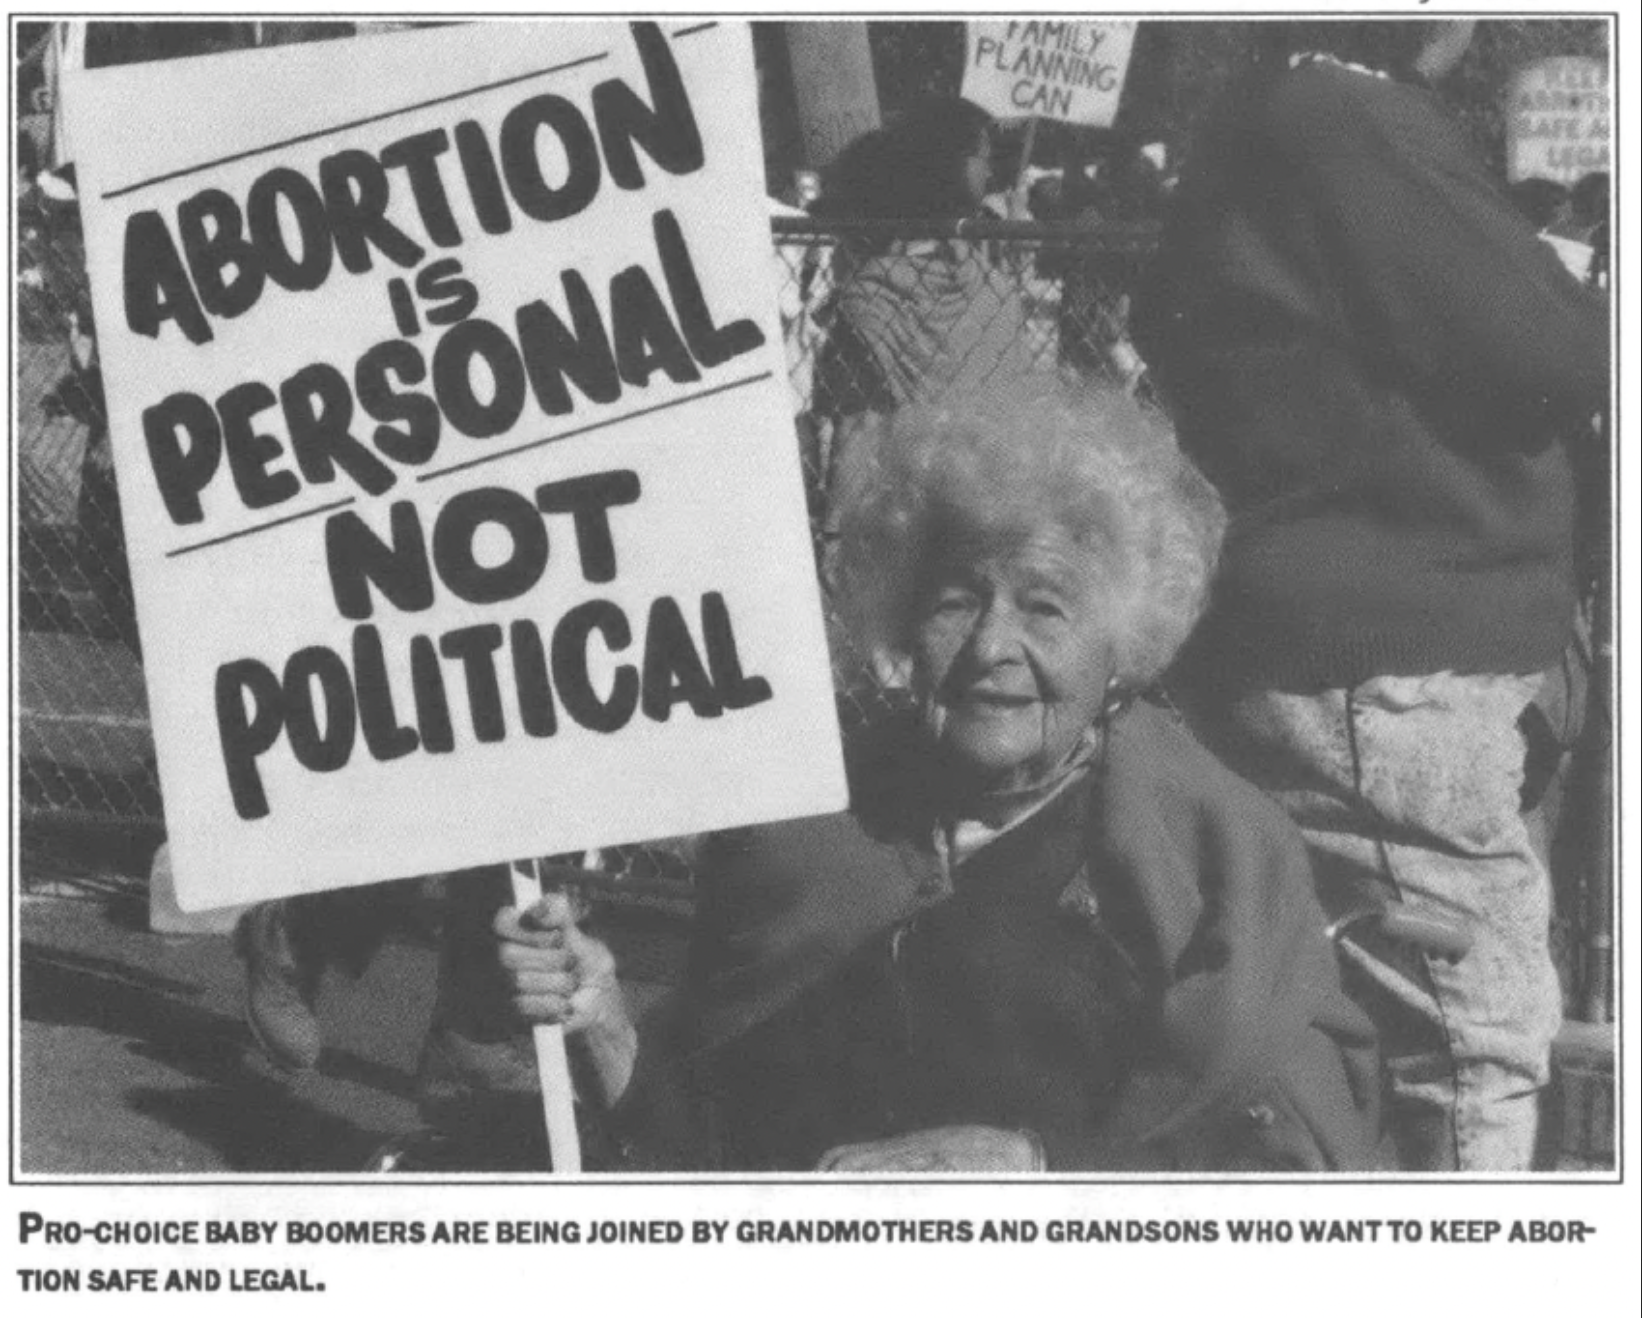 woman holding sign reading "Abortion is personal, not political"